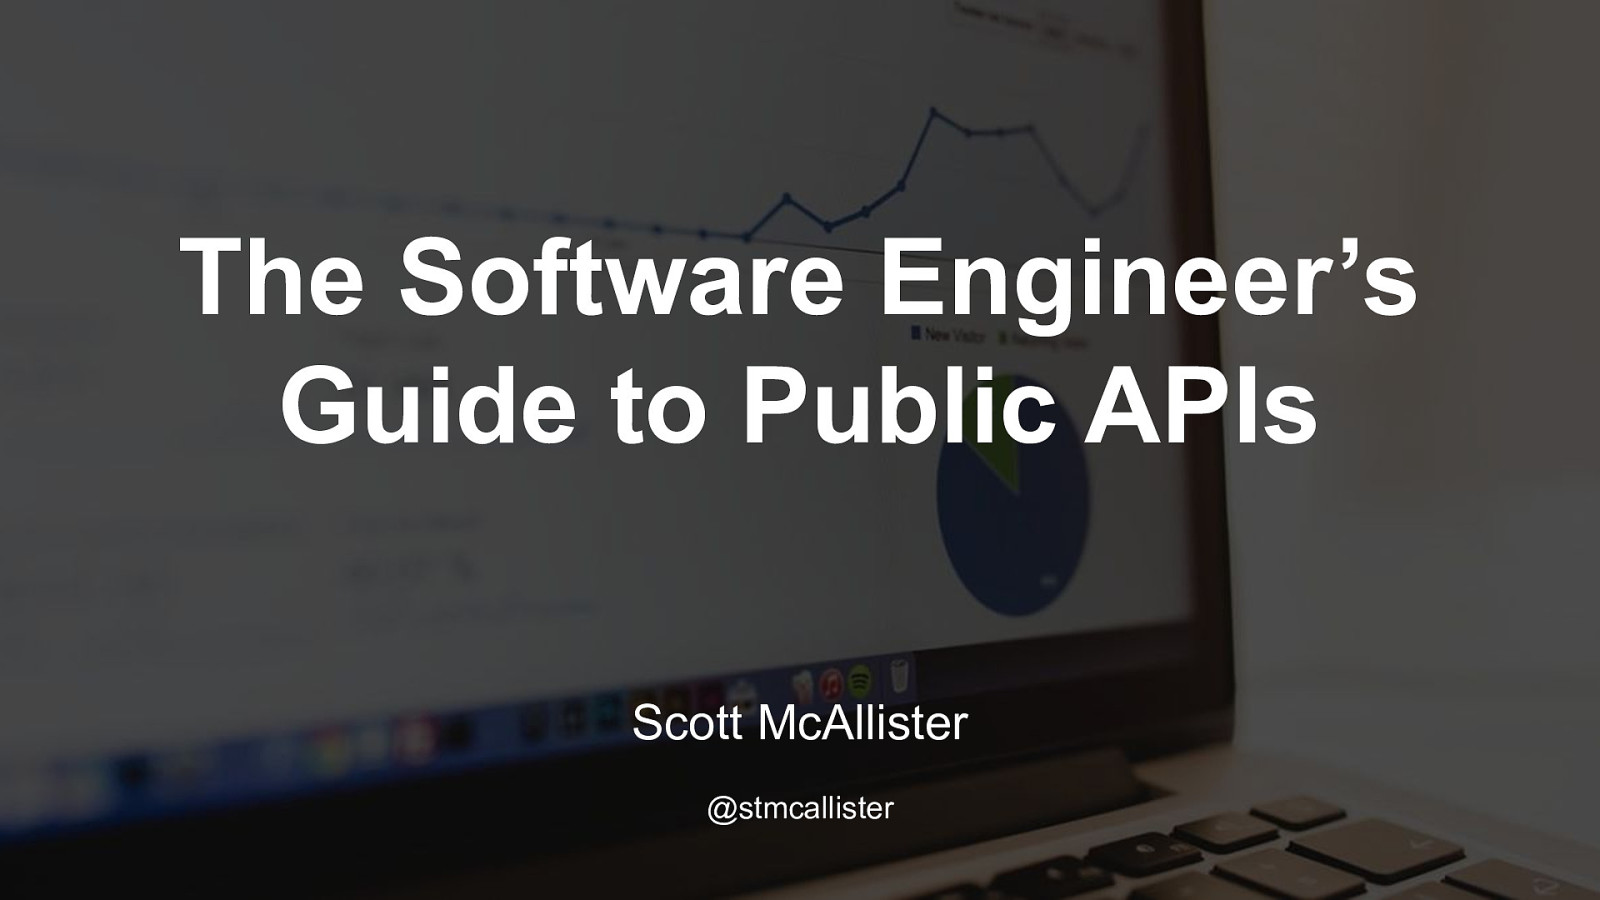 The Software Engineer’s Guide to Public APIs